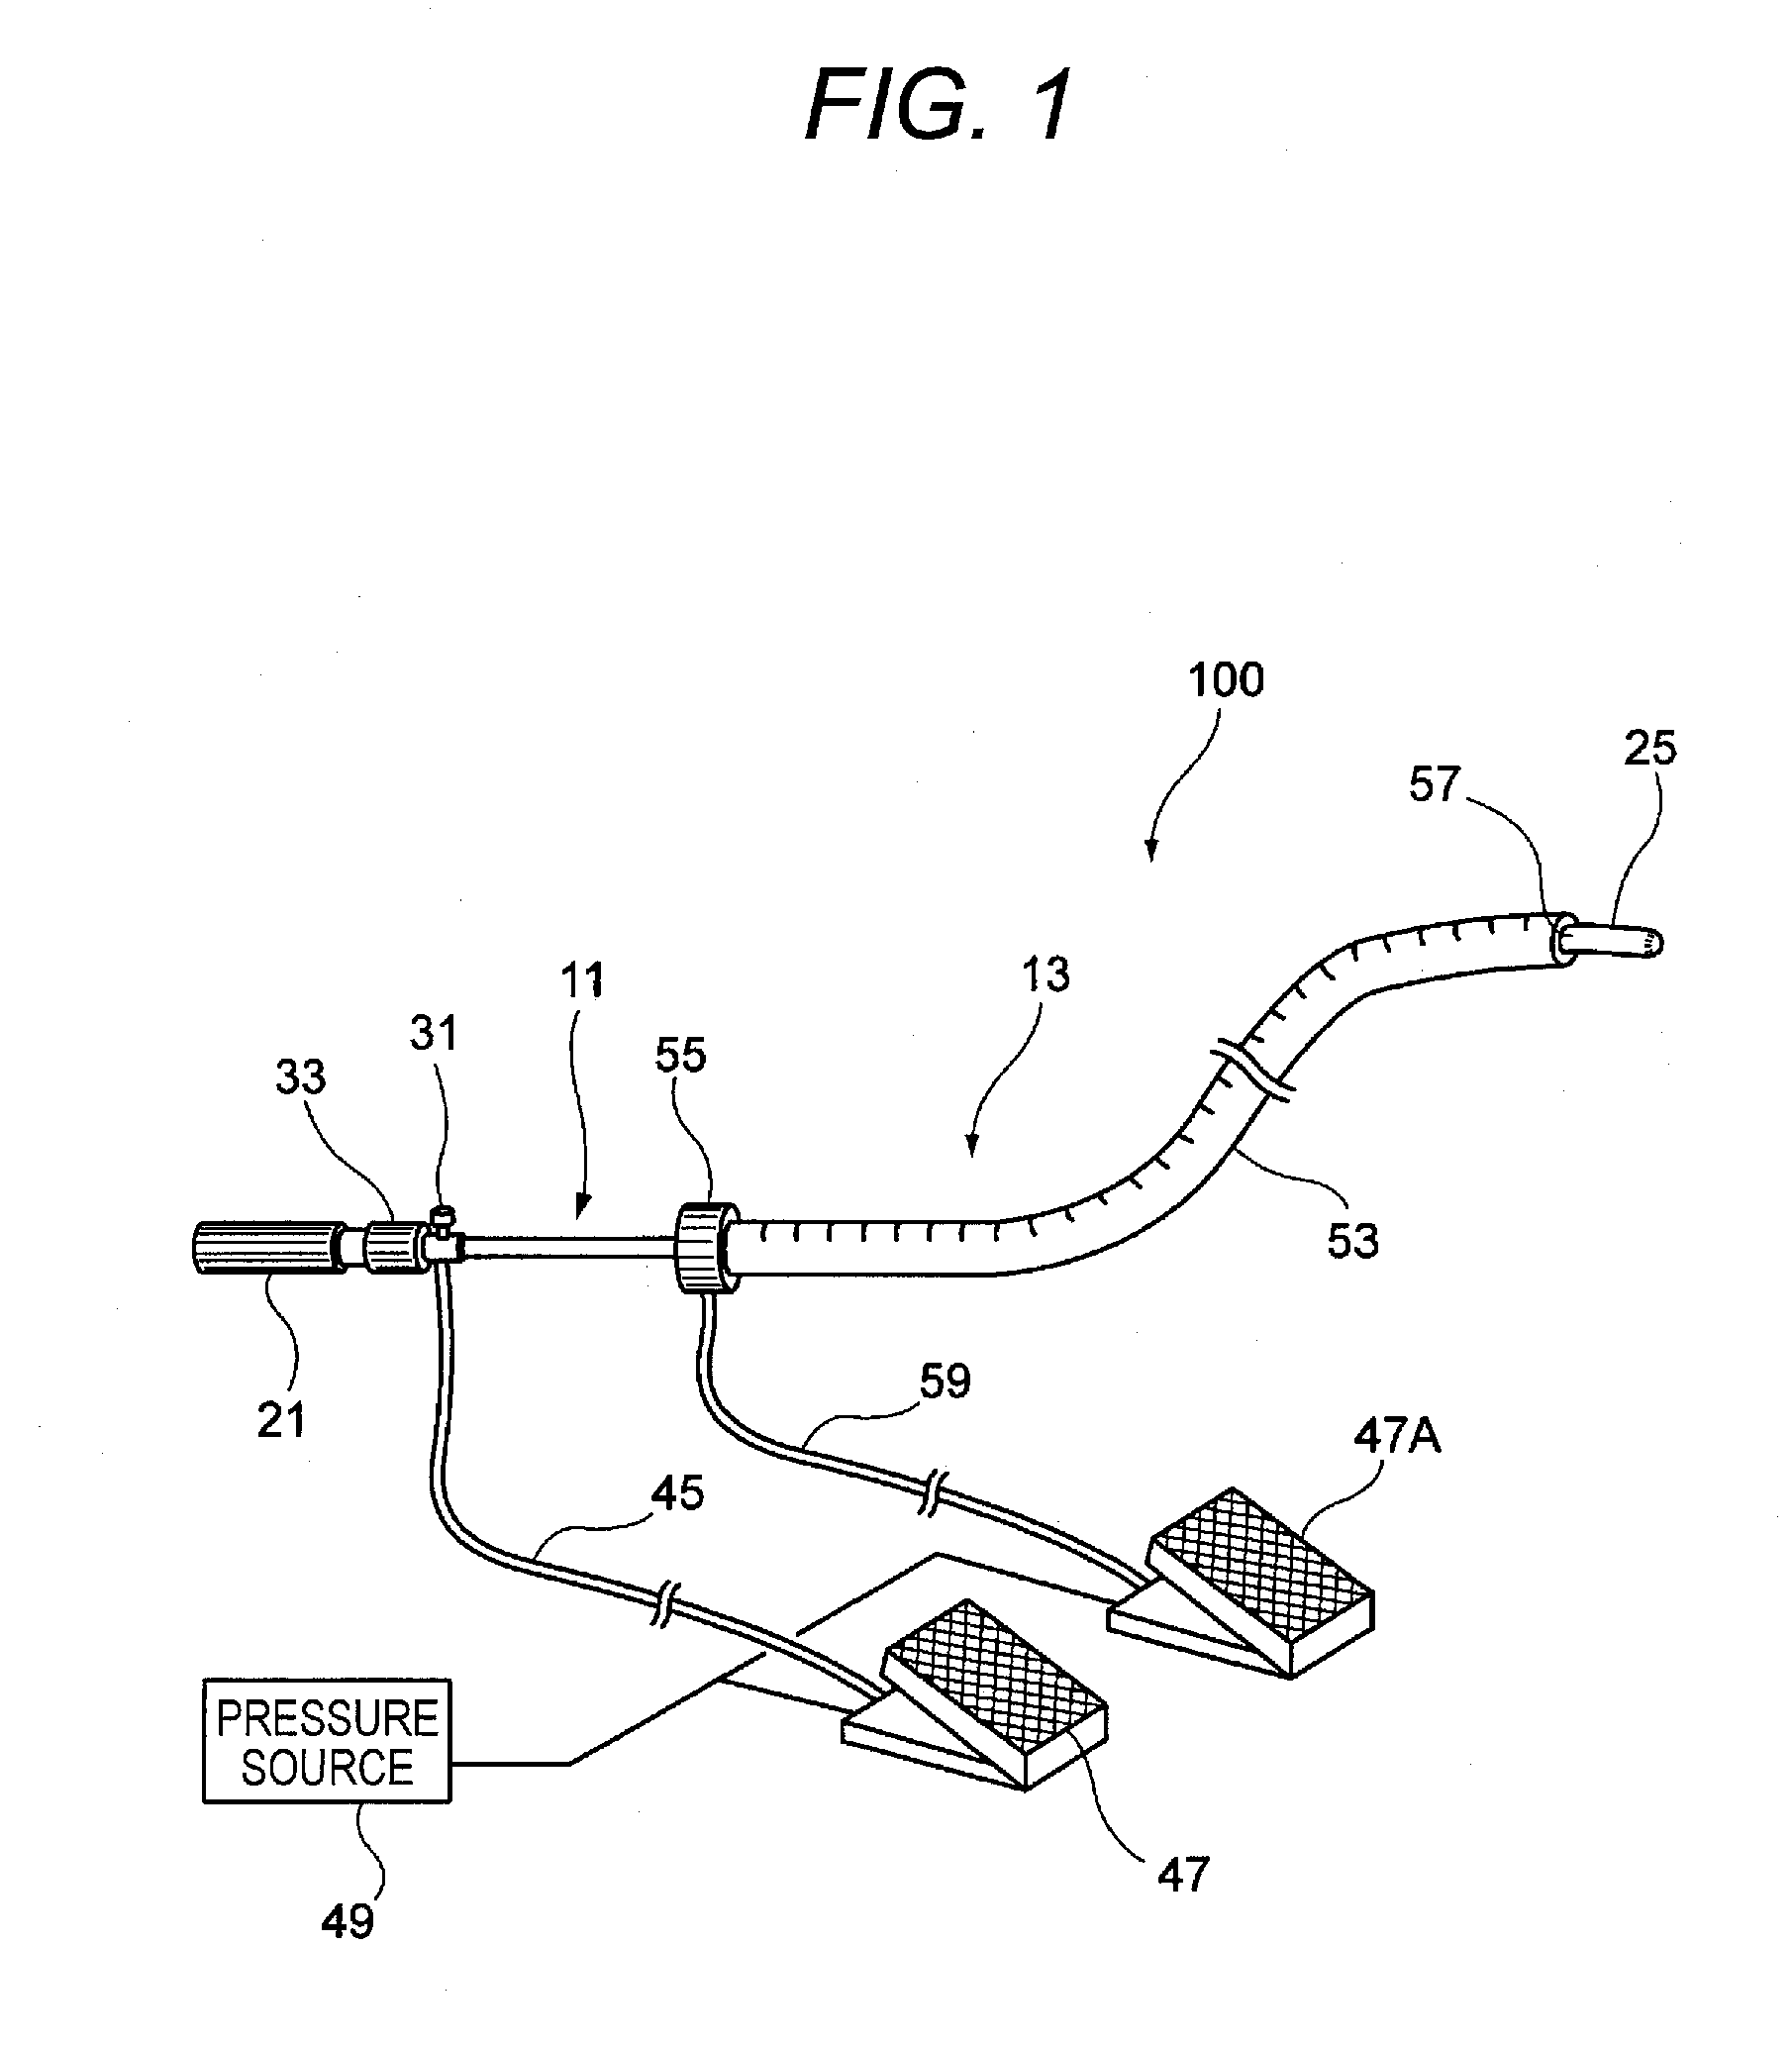 Bending-insertion assisting instrument and insertion path securing apparatus